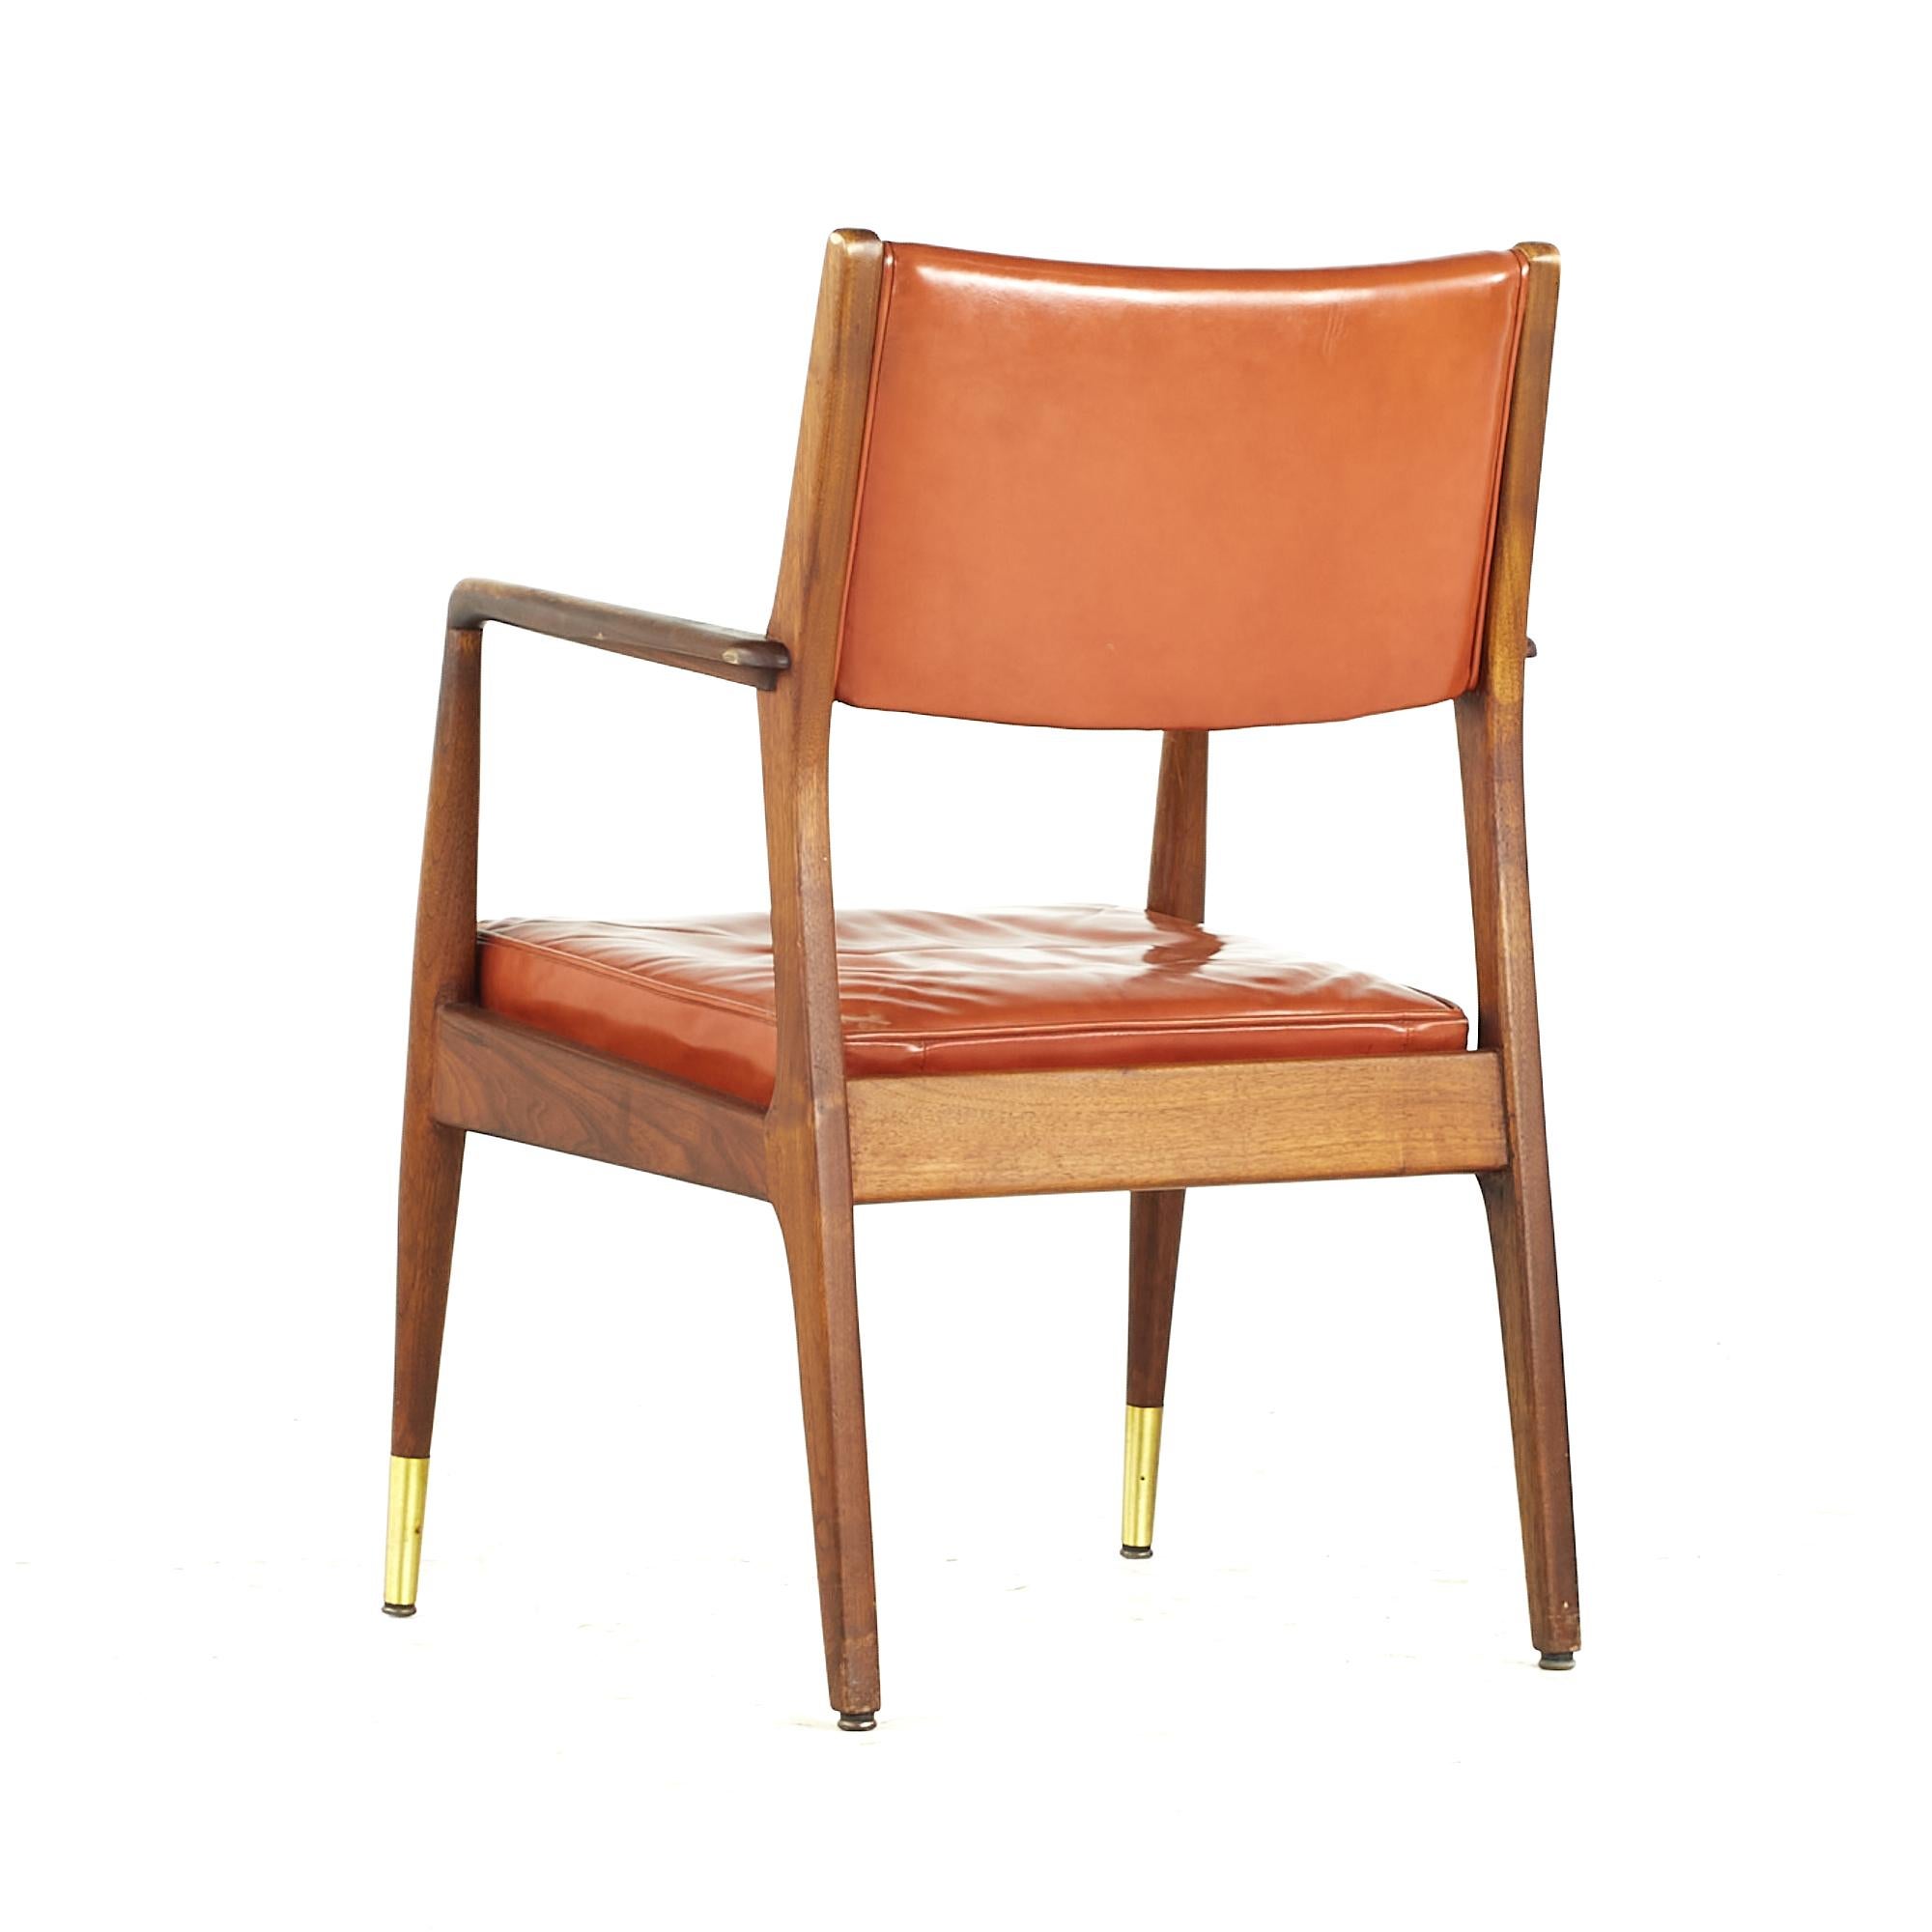 Late 20th Century Stow Davis Midcentury Walnut and Brass Lounge Chair For Sale